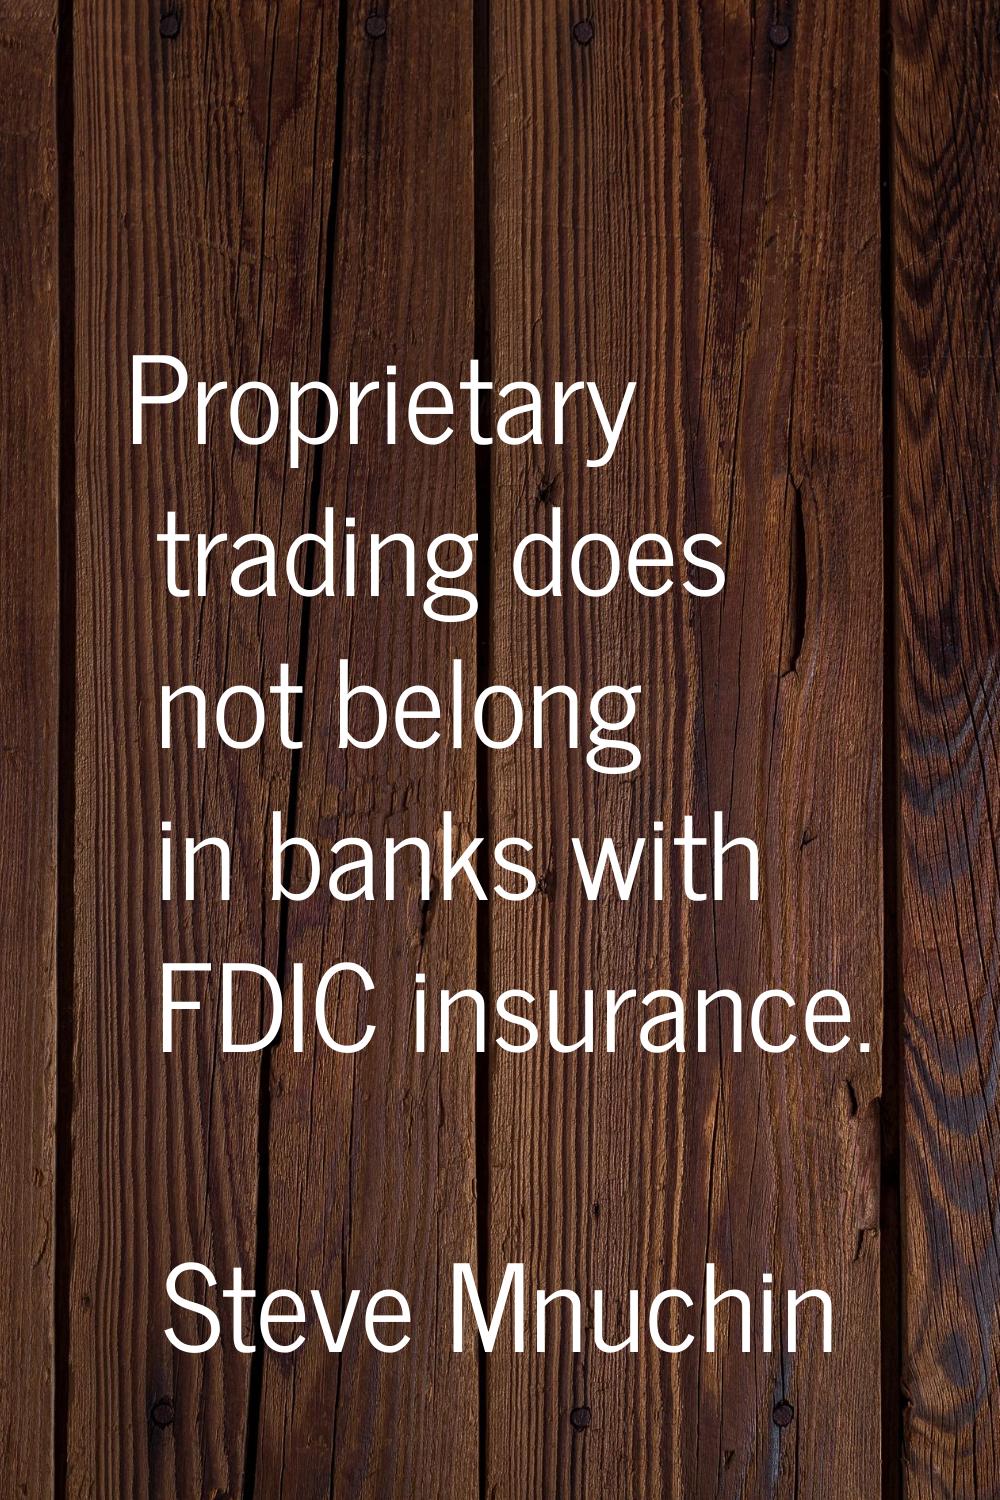 Proprietary trading does not belong in banks with FDIC insurance.